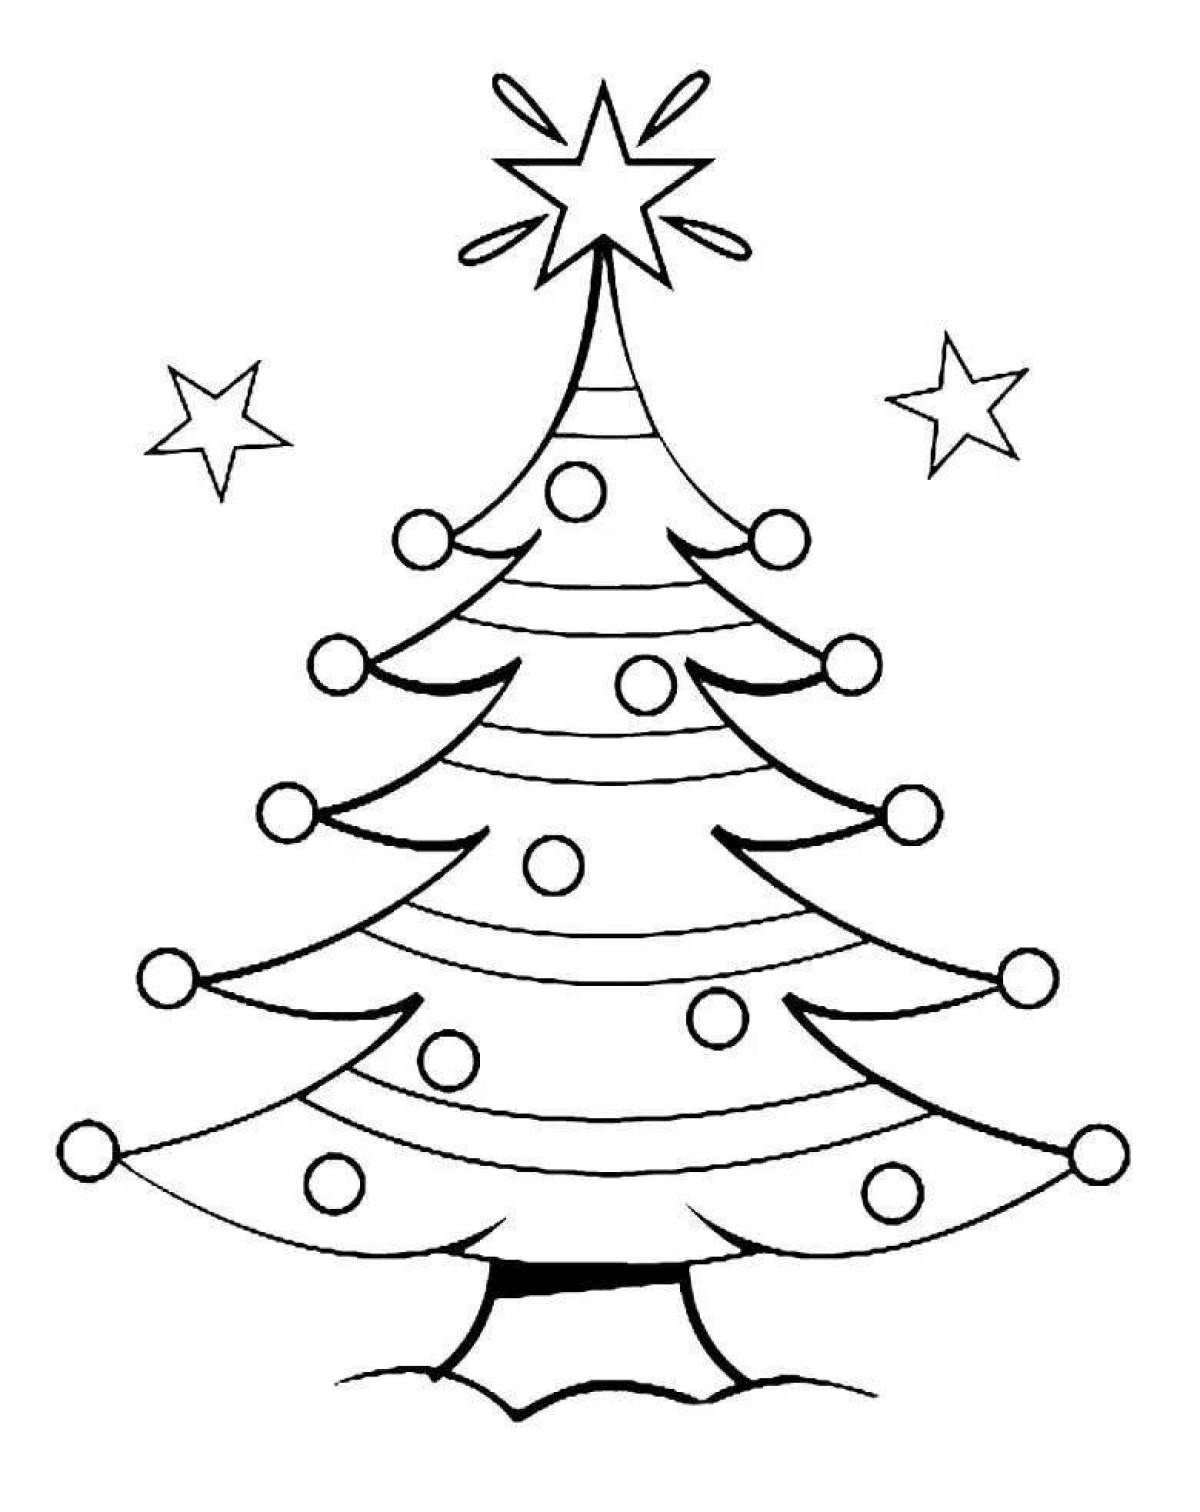 Christmas tree blooming coloring page for kids